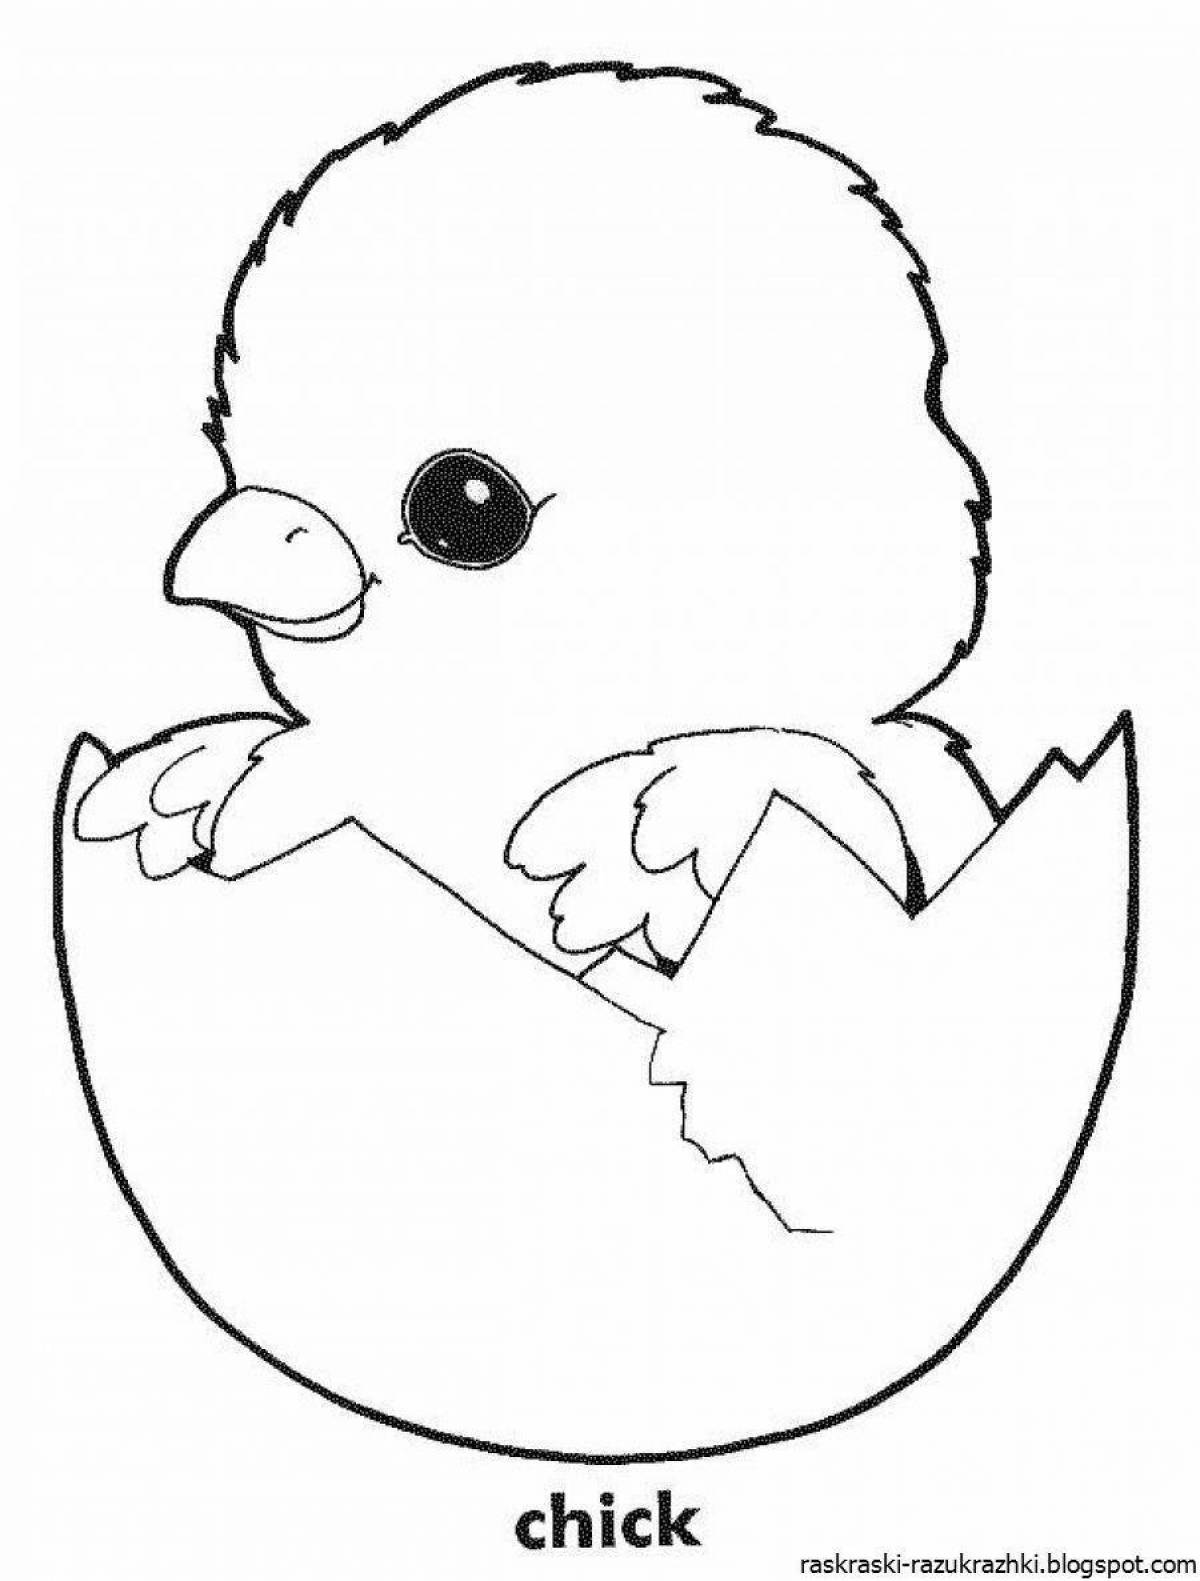 Sweet chick coloring book for children 4-5 years old